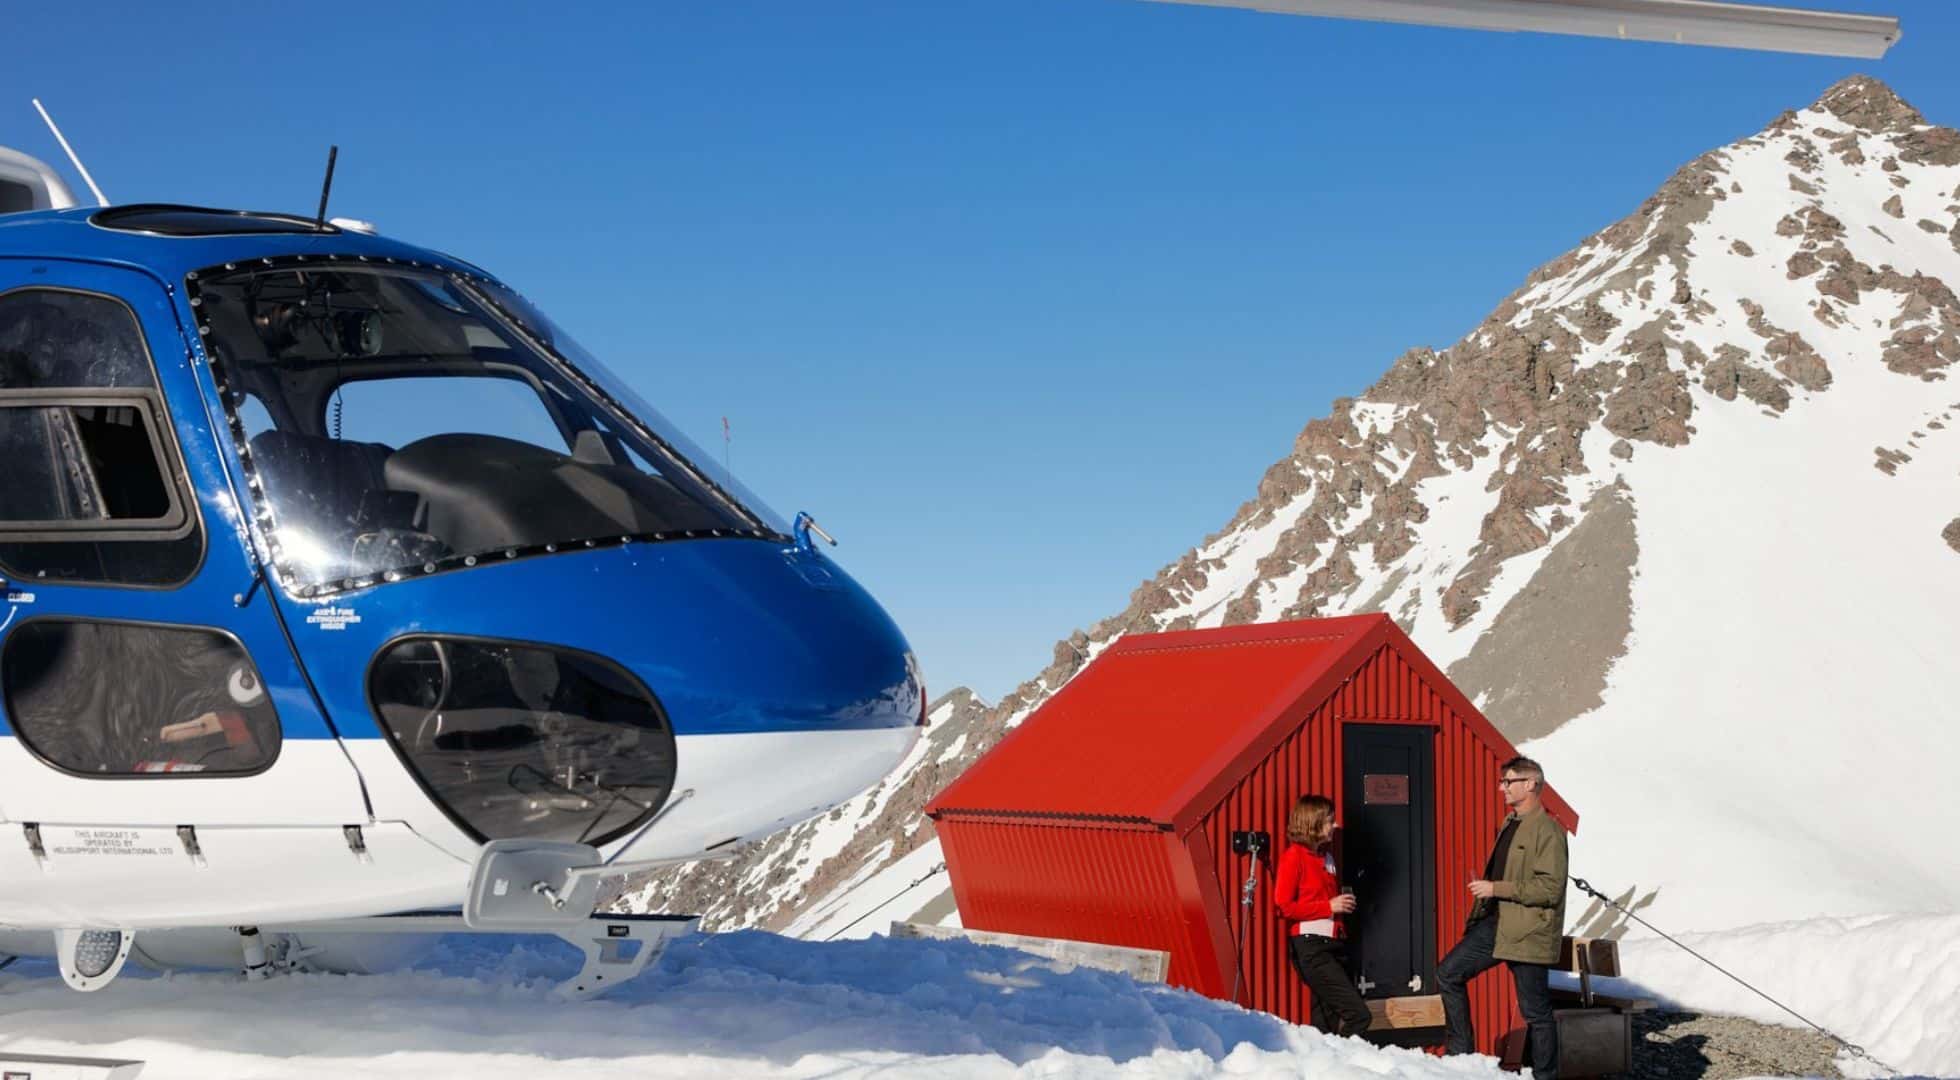 Whiskey Destinations 2023: The High Altitude Whisky Bar